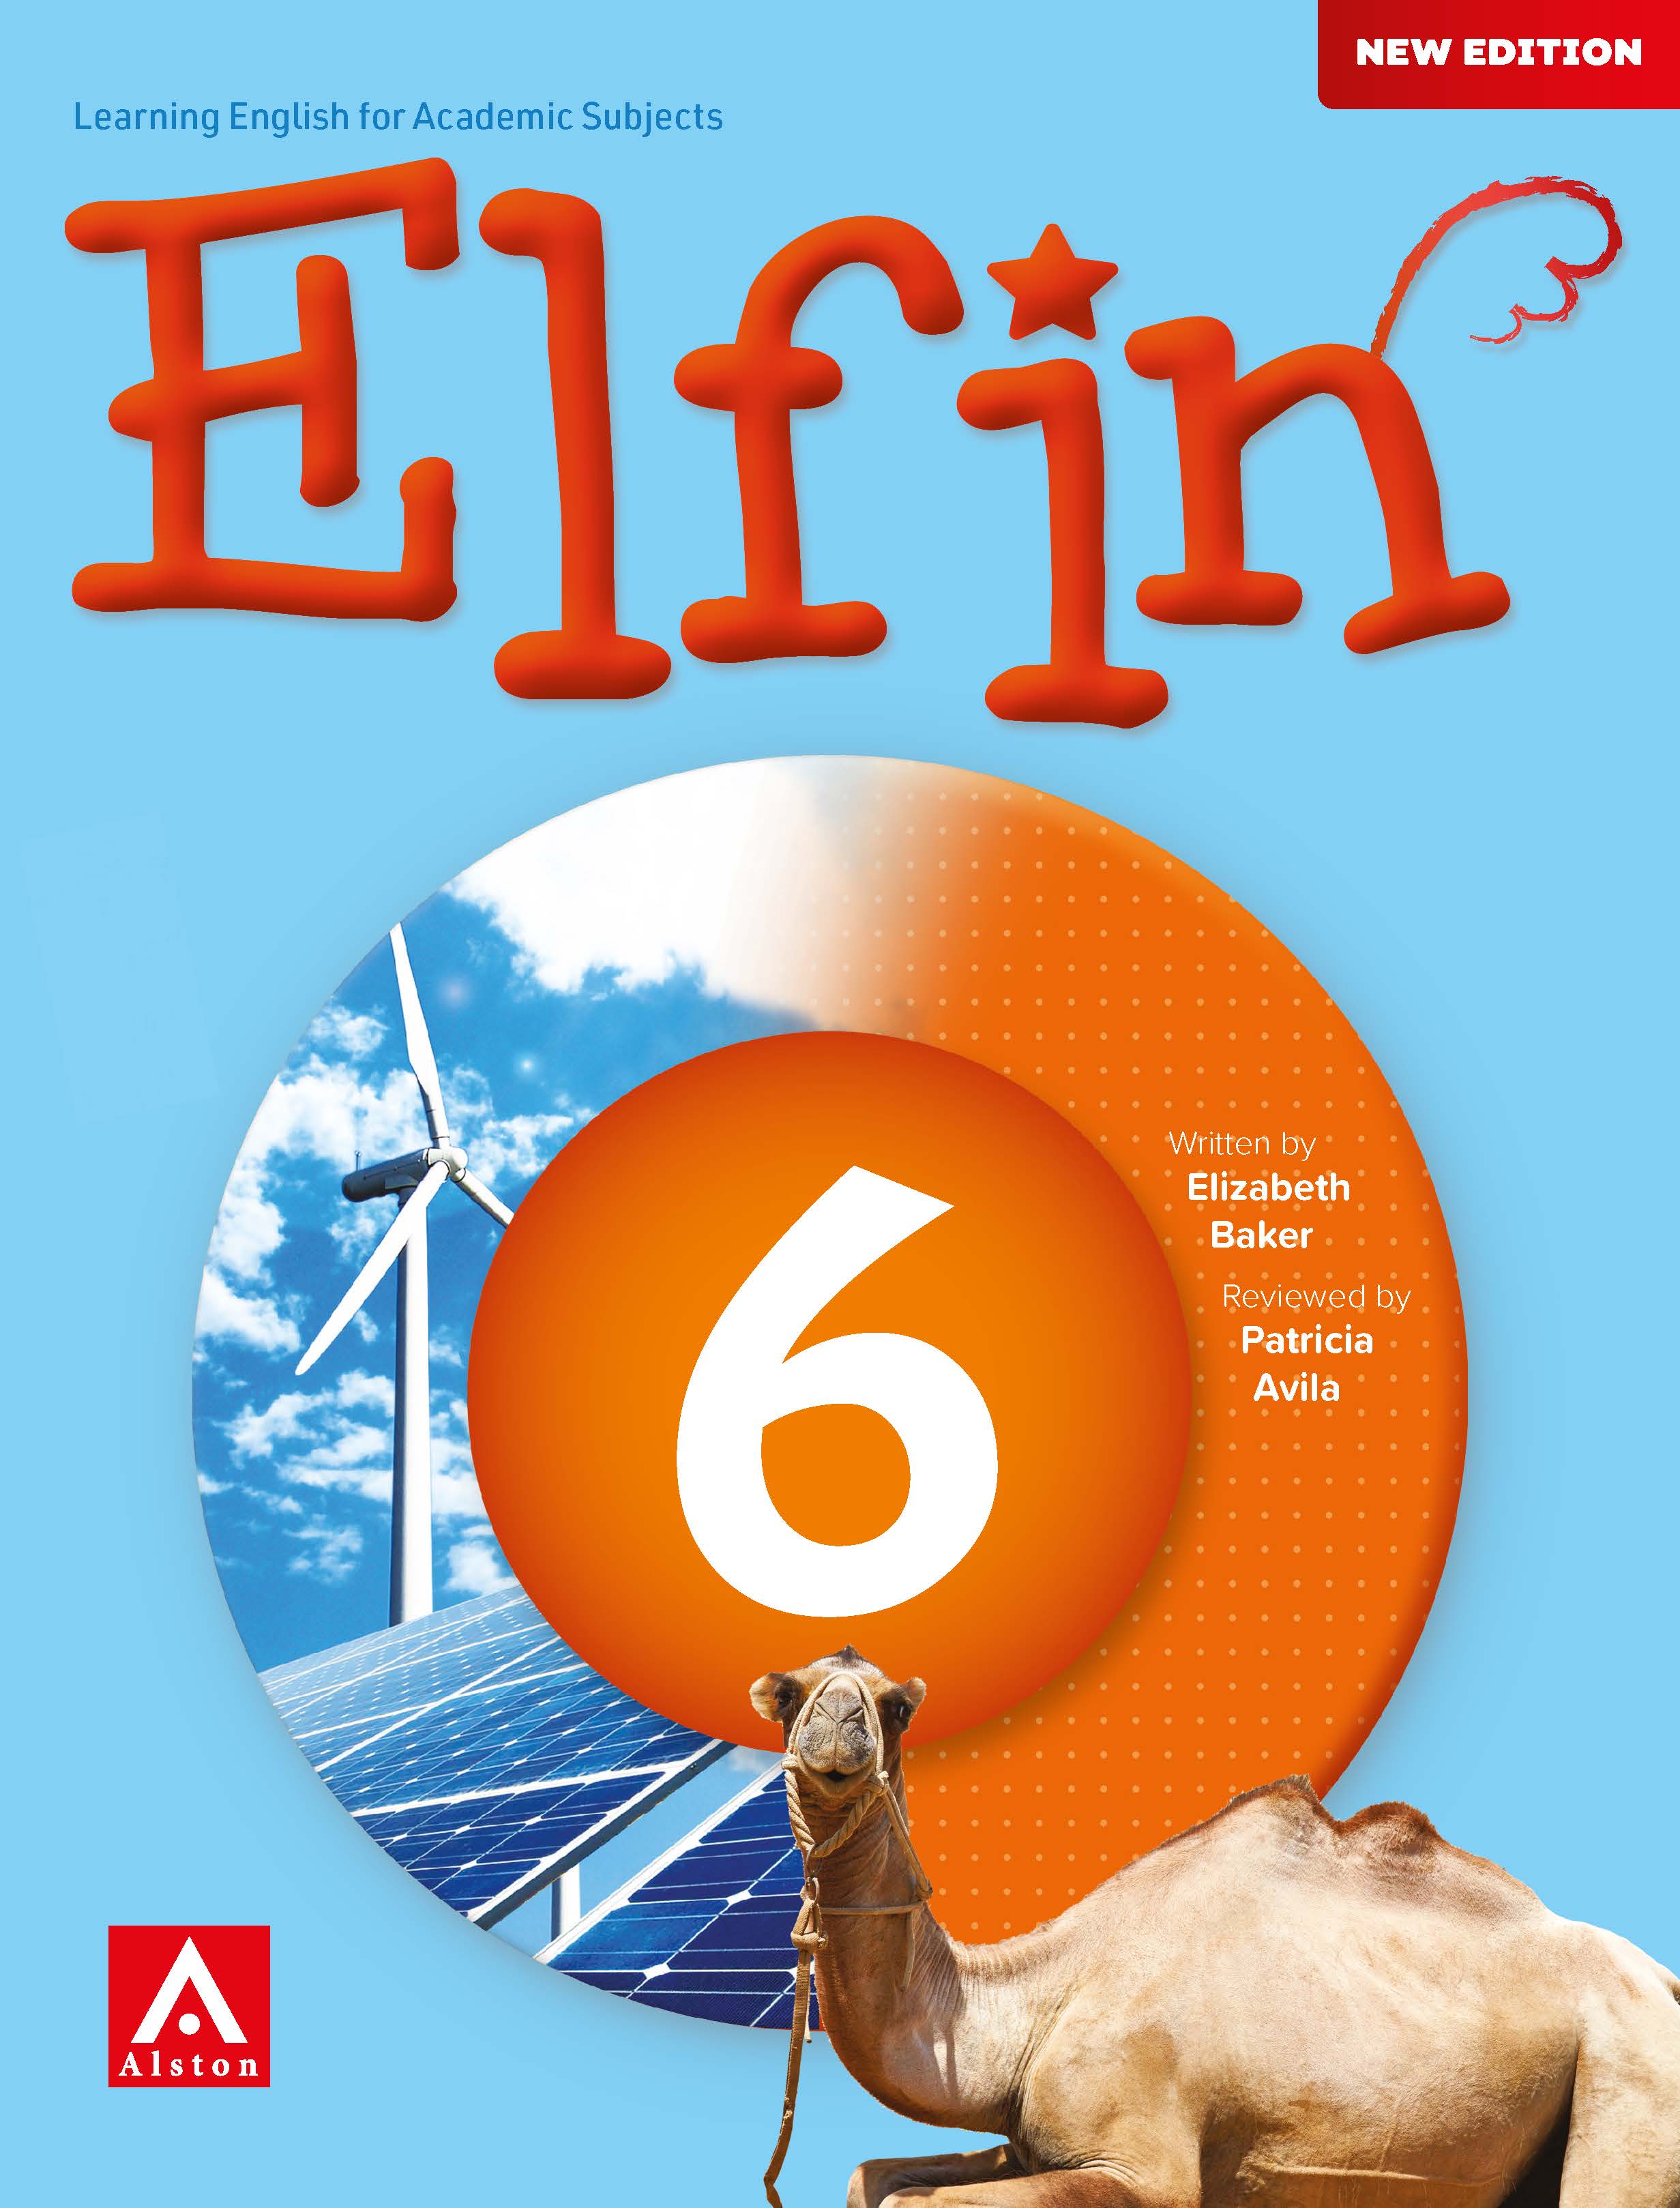 Elfin New Edition Cover SB TG 1 6 Page 06